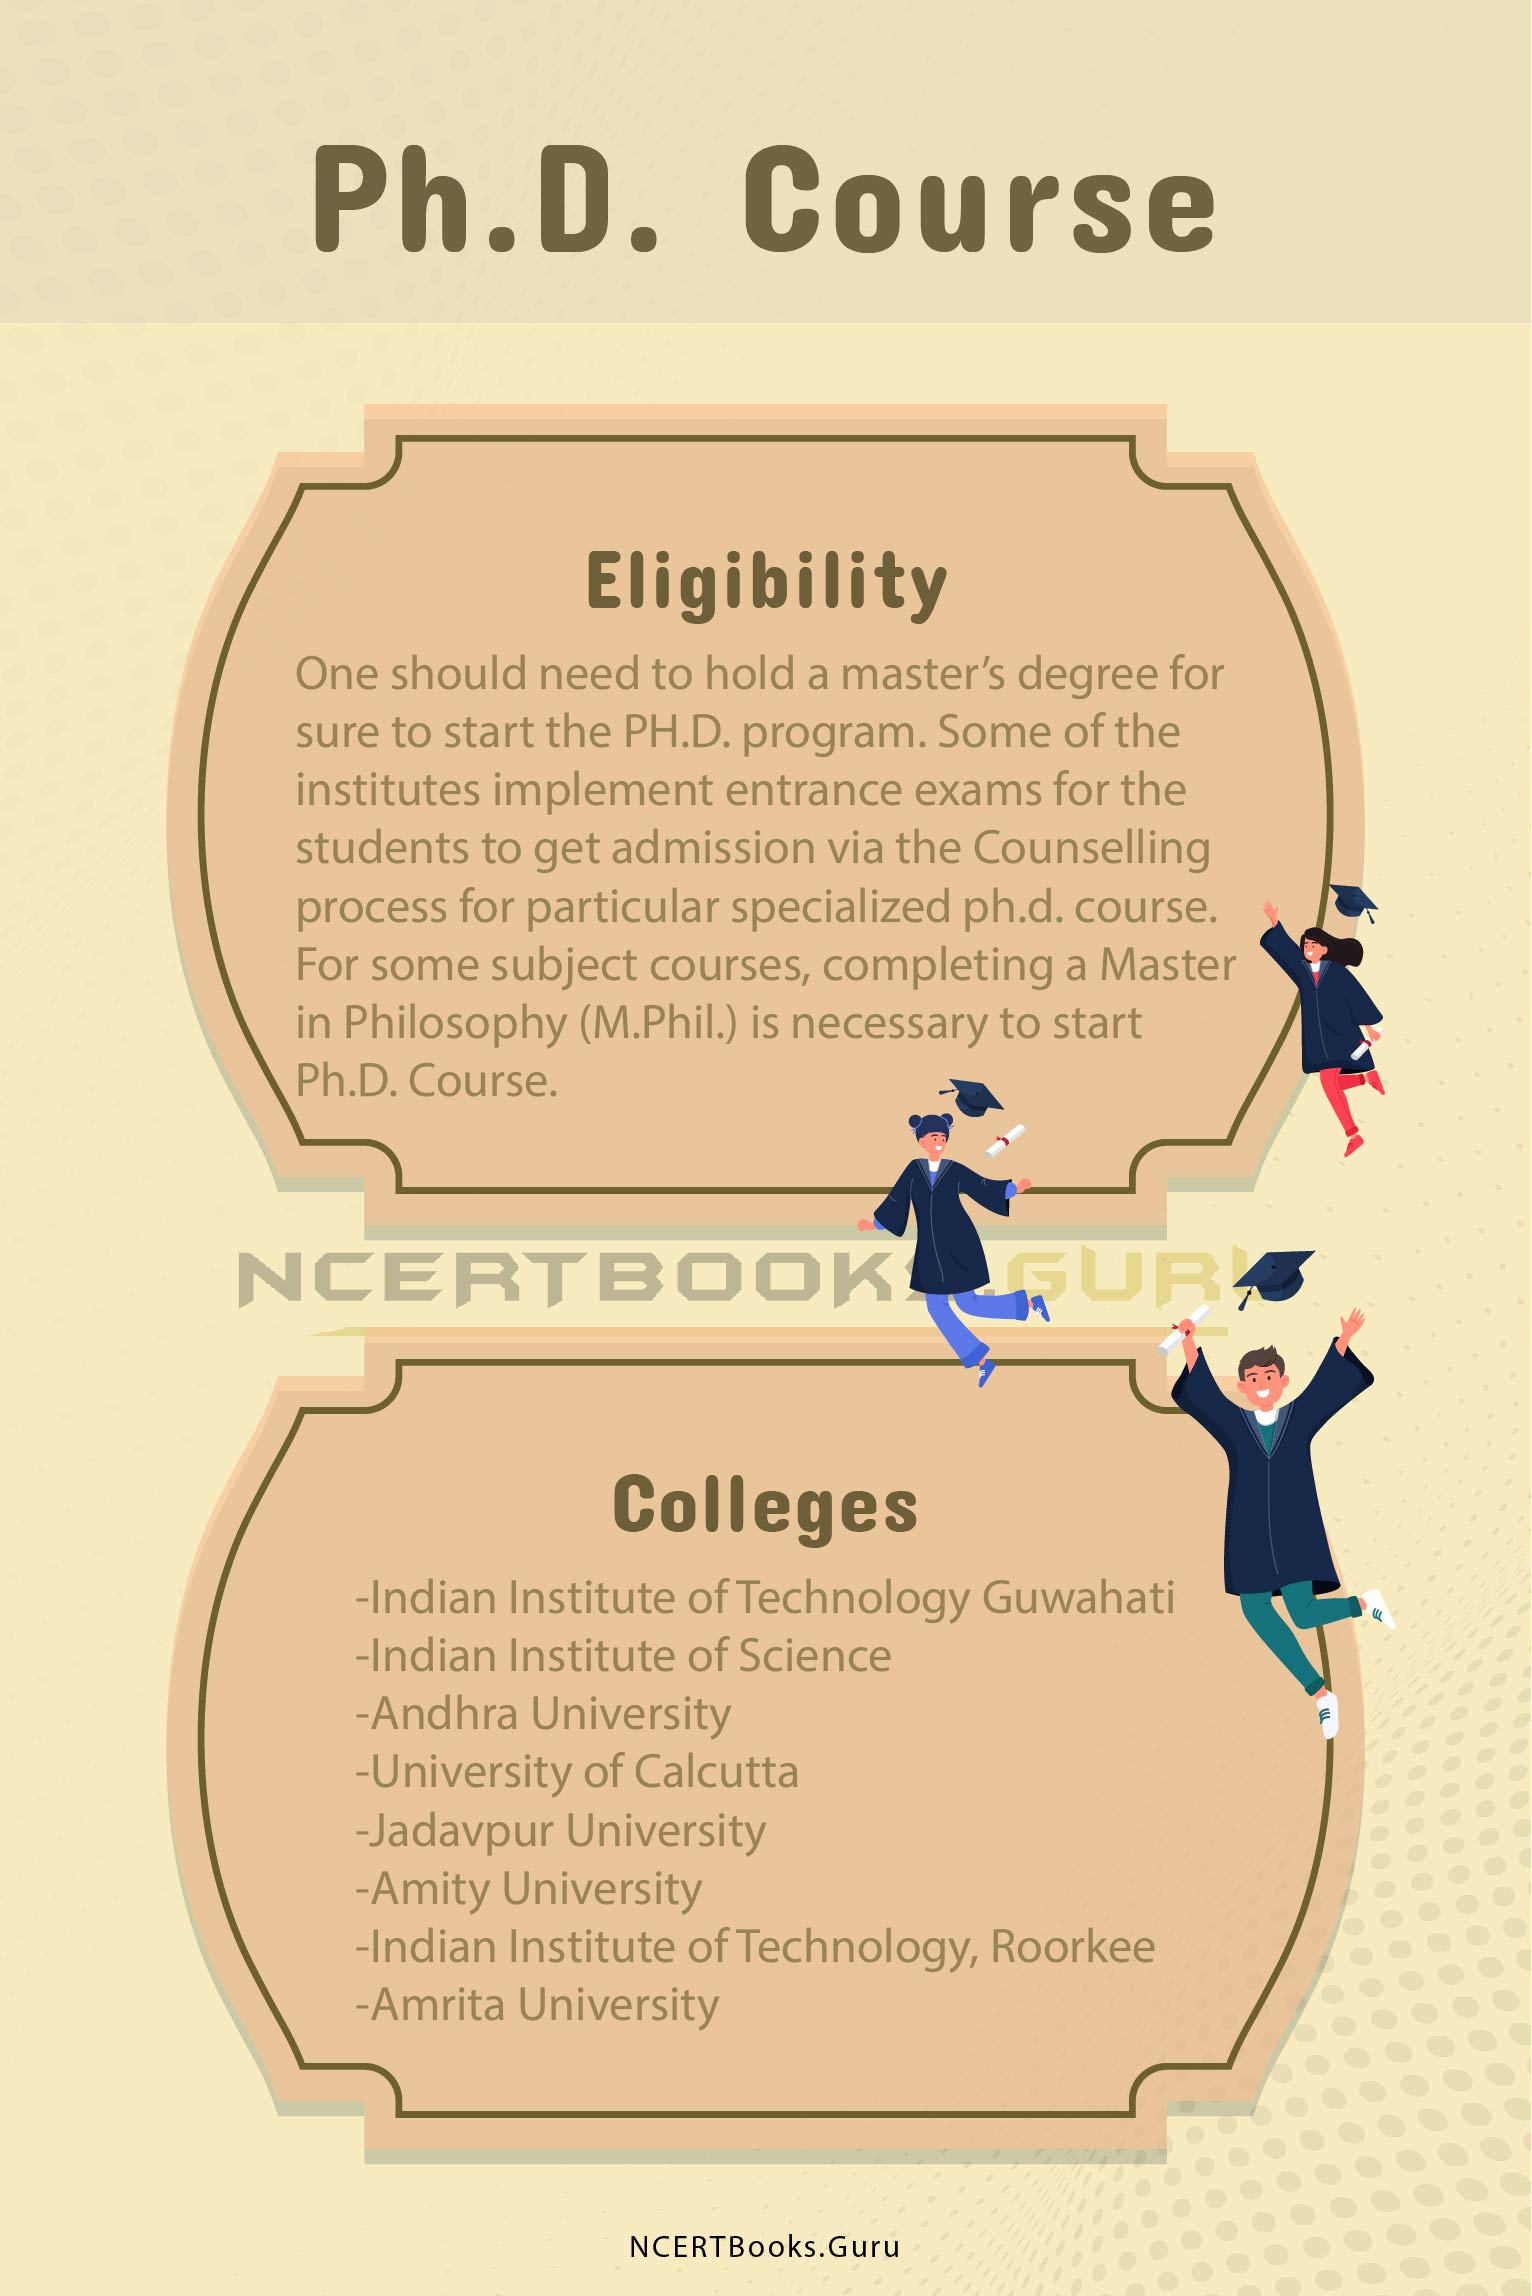 phd course eligibility in india